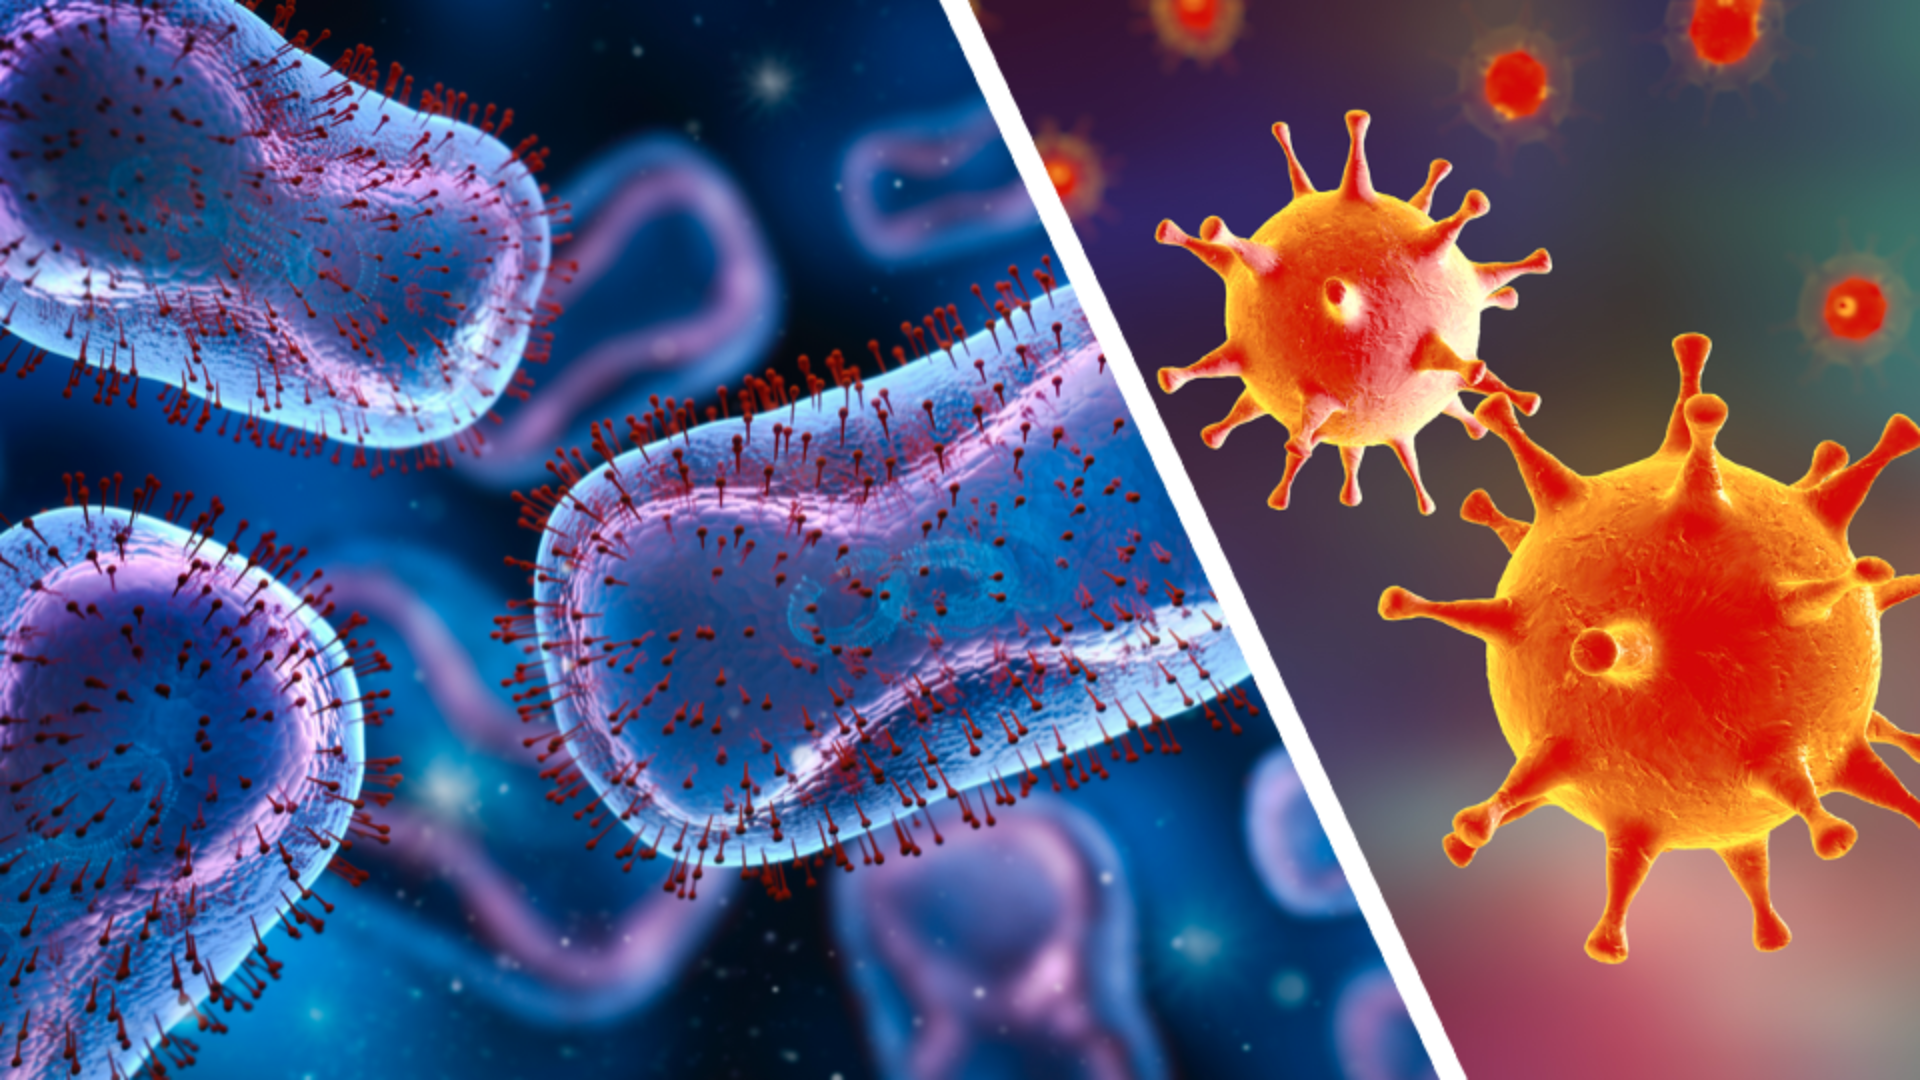 Cover Image for Distinguishing Monkeypox (Mpox) and Herpes Simplex Virus (HSV): A Comparative Analysis